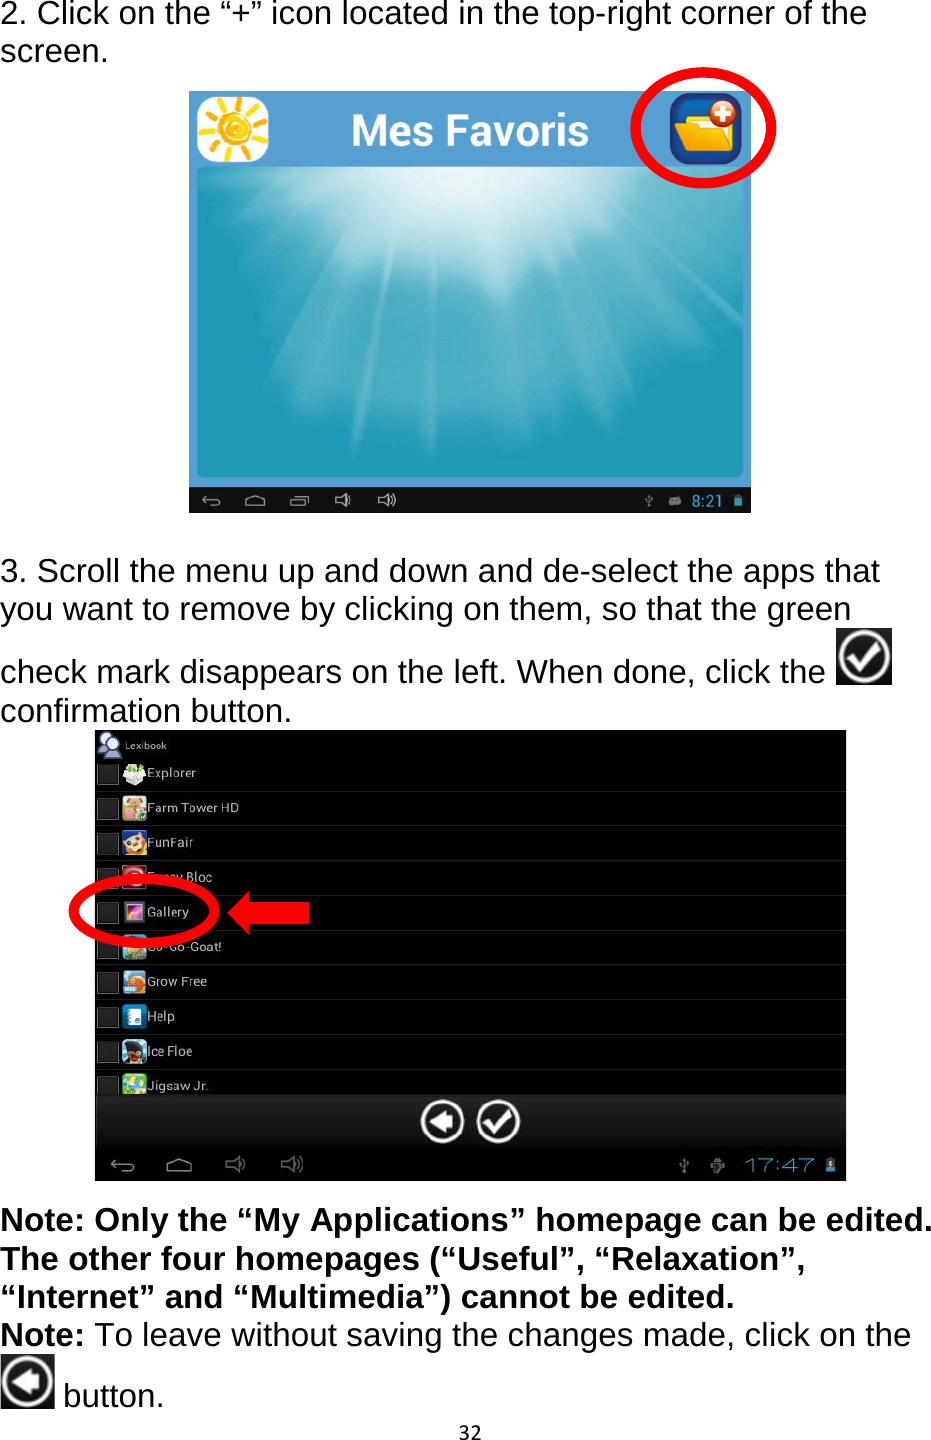 32  2. Click on the “+” icon located in the top-right corner of the screen.   3. Scroll the menu up and down and de-select the apps that you want to remove by clicking on them, so that the green check mark disappears on the left. When done, click the confirmation button.  Note: Only the “My Applications” homepage can be edited. The other four homepages (“Useful”, “Relaxation”, “Internet” and “Multimedia”) cannot be edited.  Note: To leave without saving the changes made, click on the  button.  